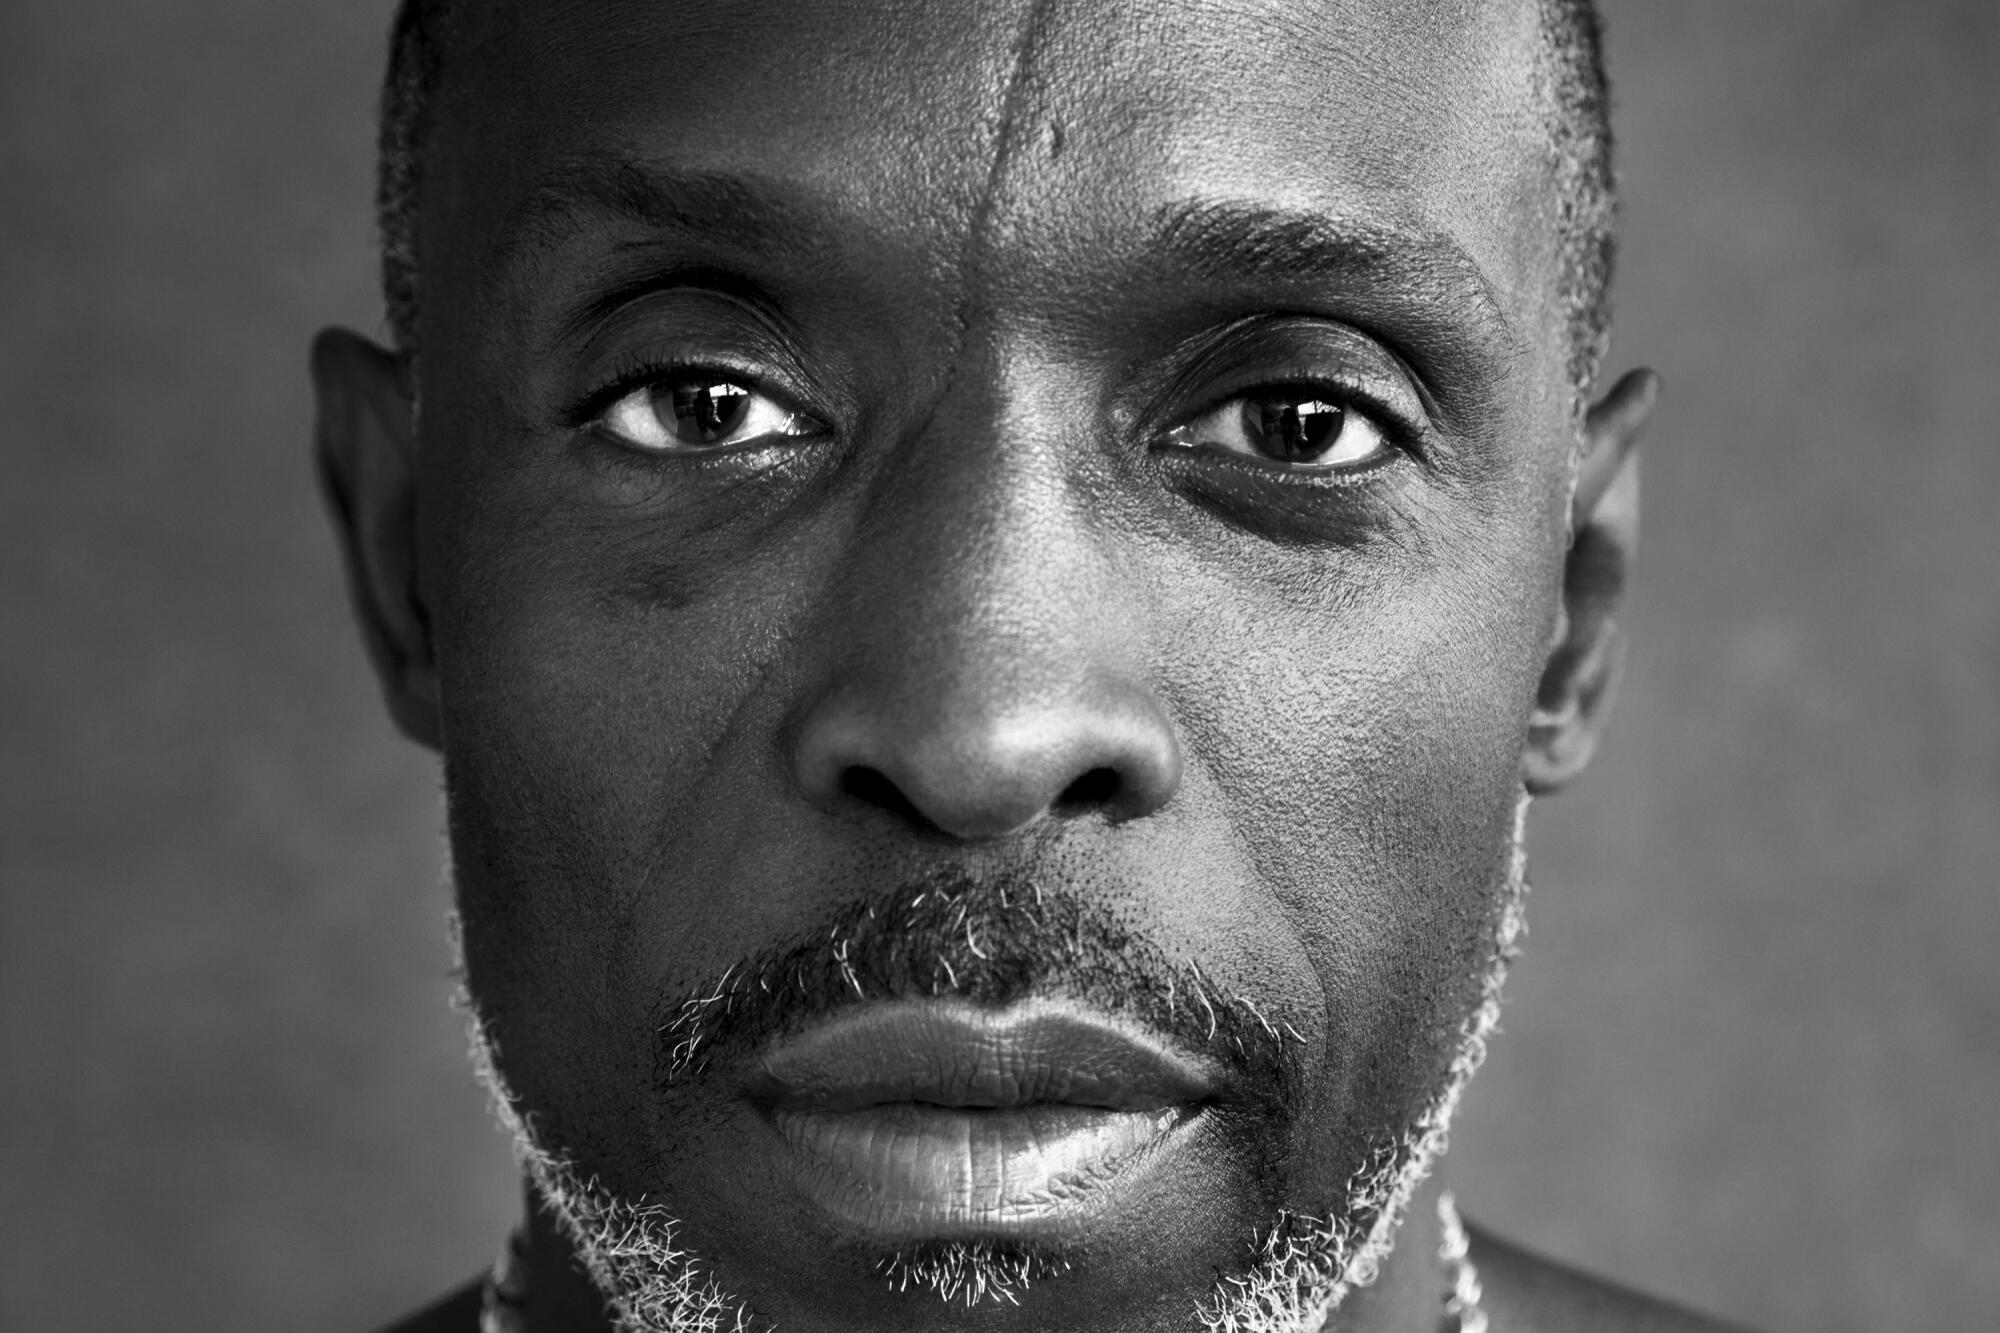 Michael K. Williams, sporting necklaces, stares at the camera